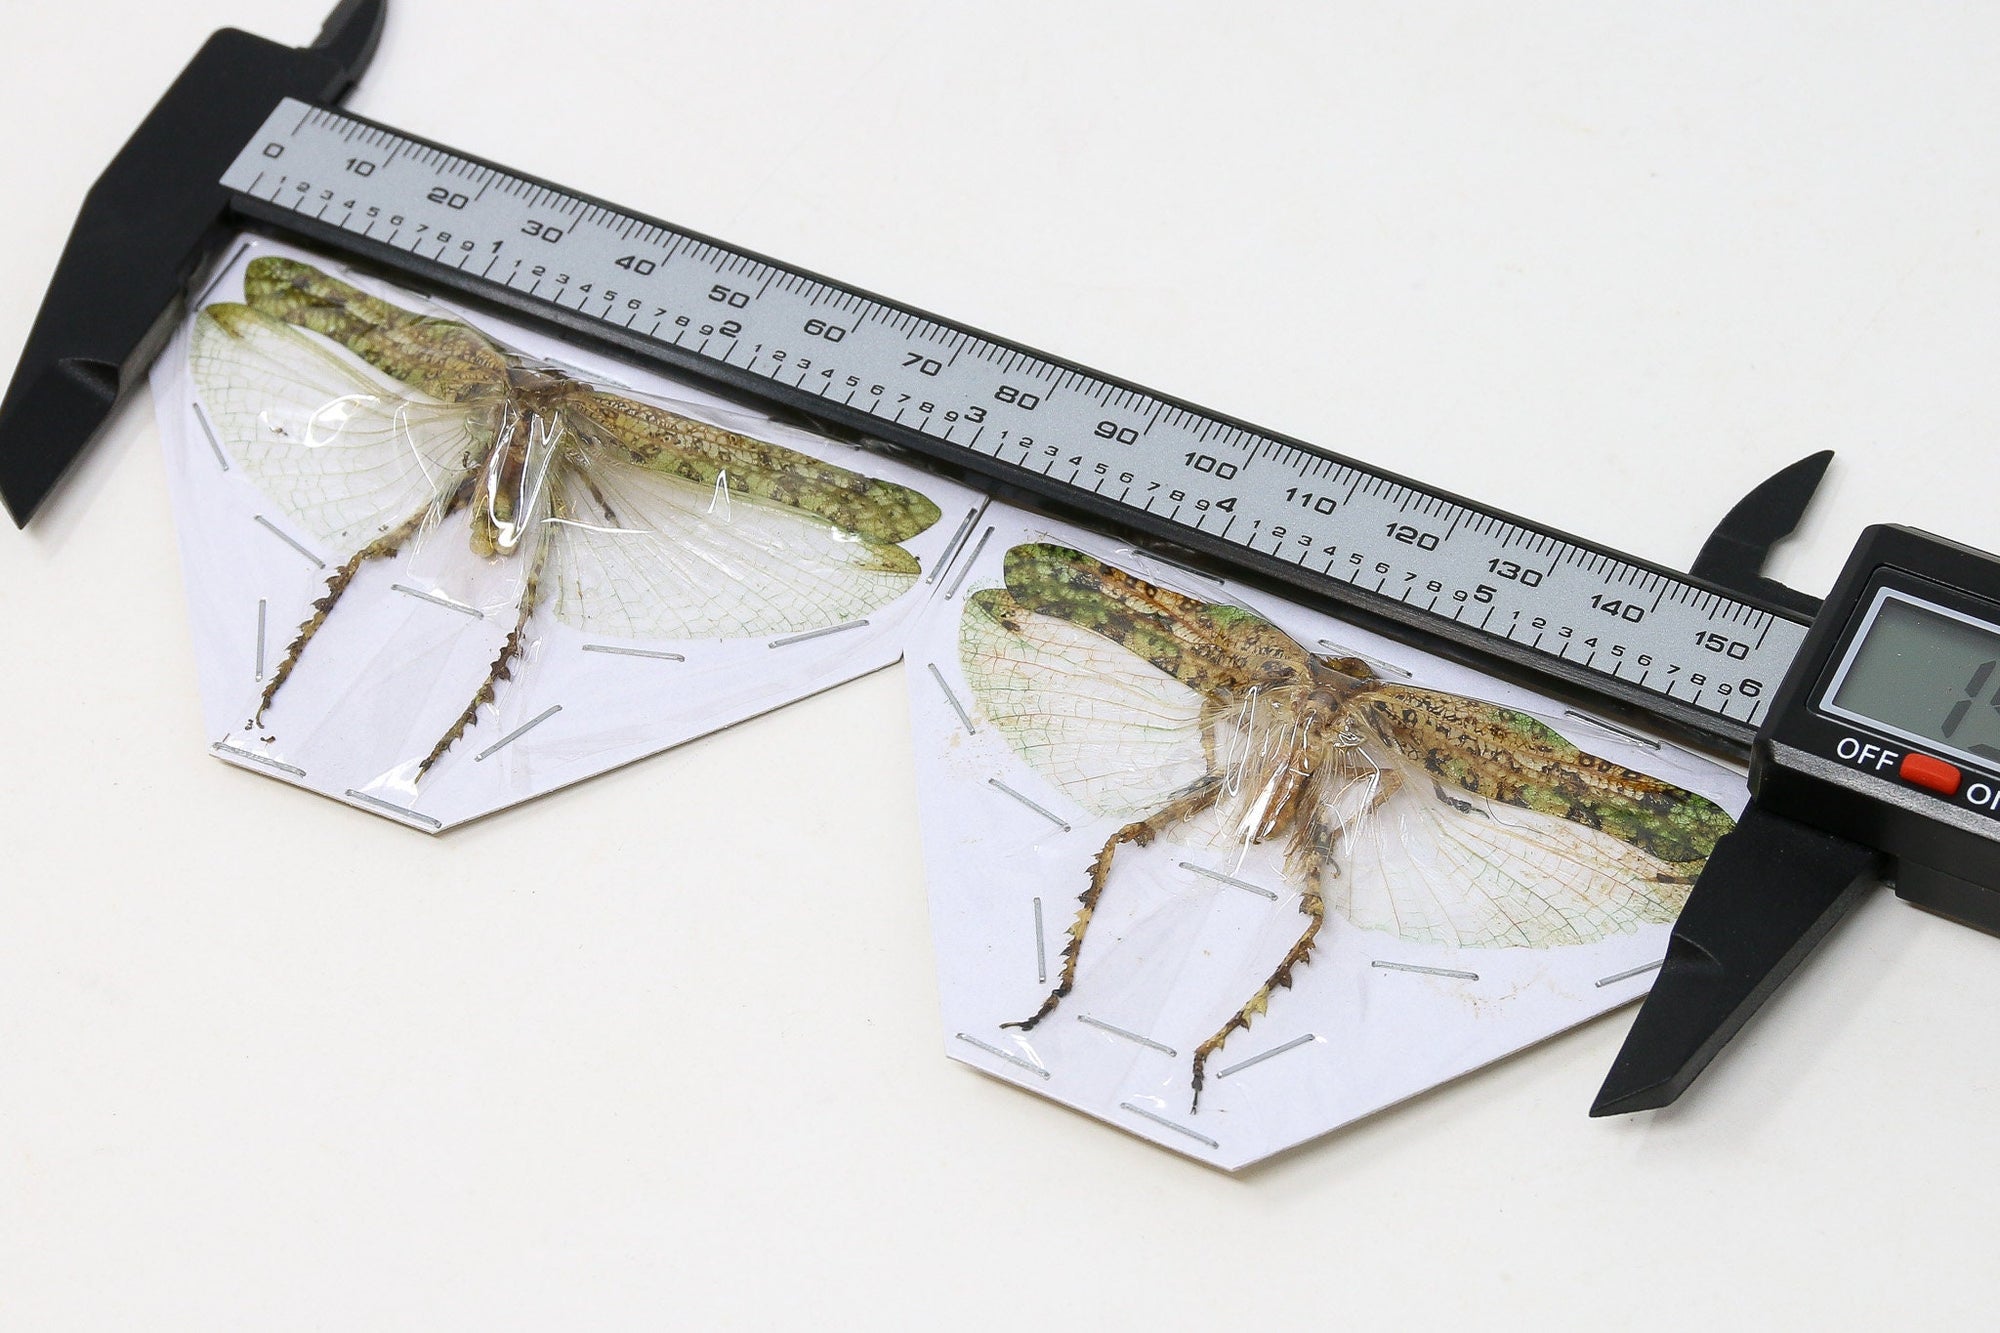 Katydid Insect Collection (Thailand) A1 Spread Specimen, Long-horned Grasshopper, Bush Cricket, Lot#05